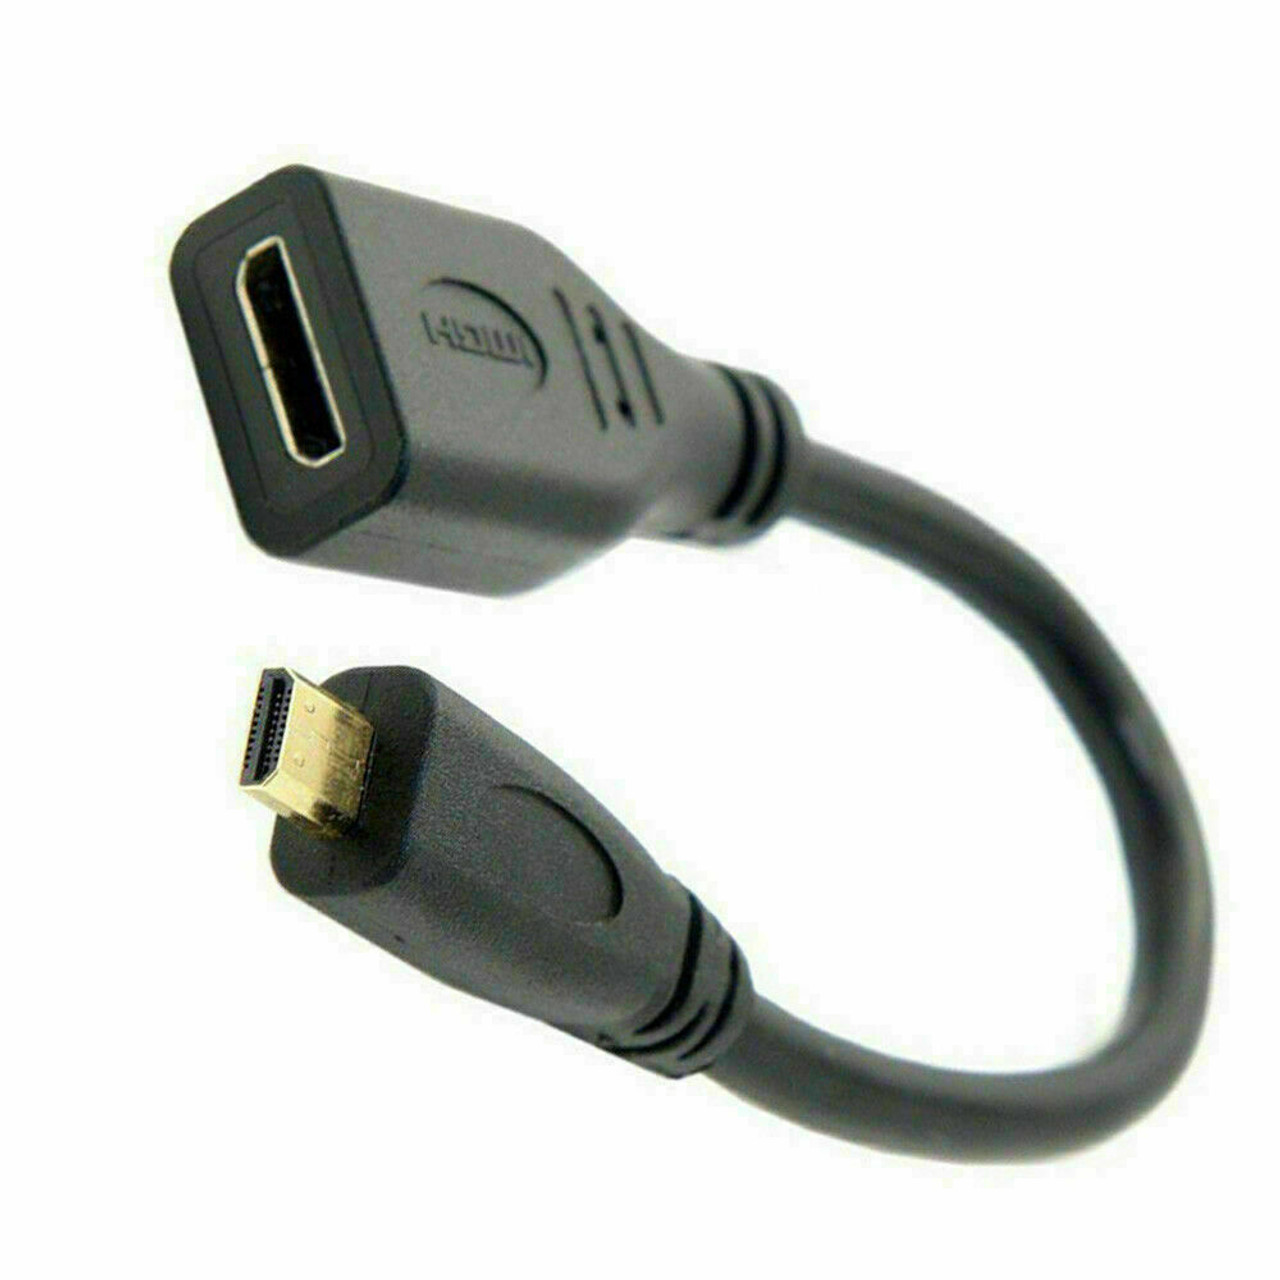 Micro HDMI Type D Male to HDMI Type A Female Cable Adapter Converter Connector